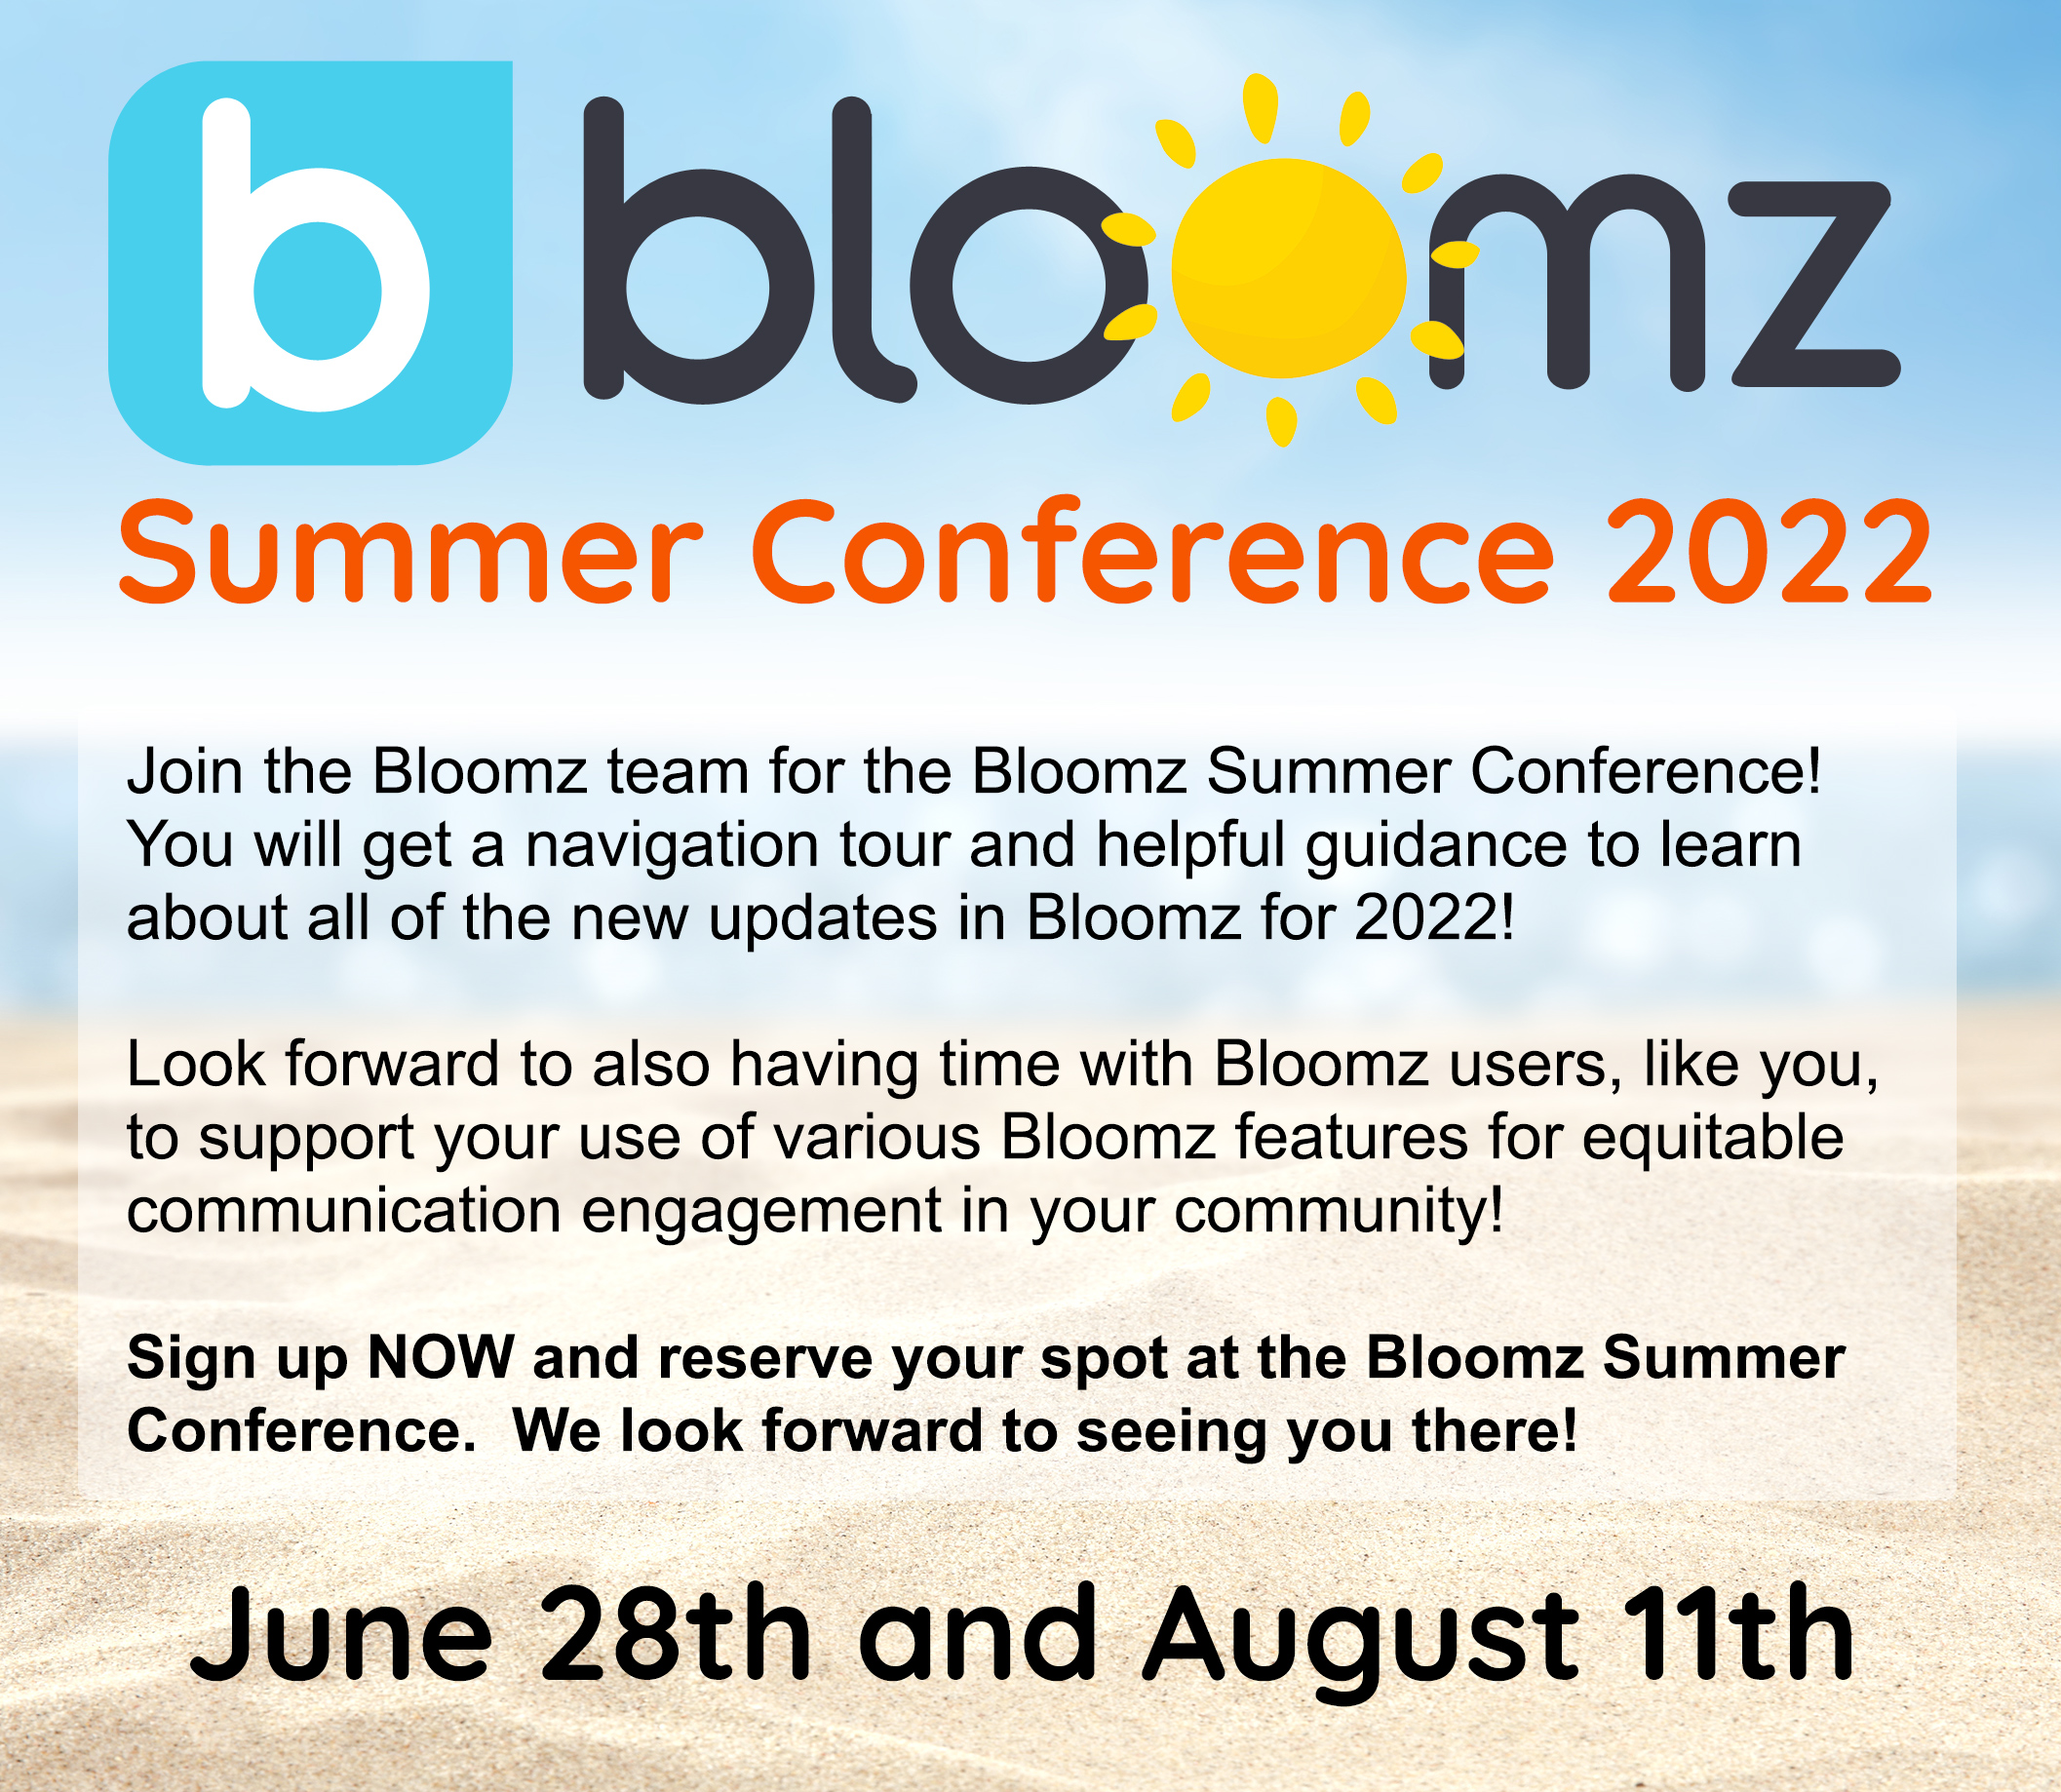 Bloomz Summer Conference 2022